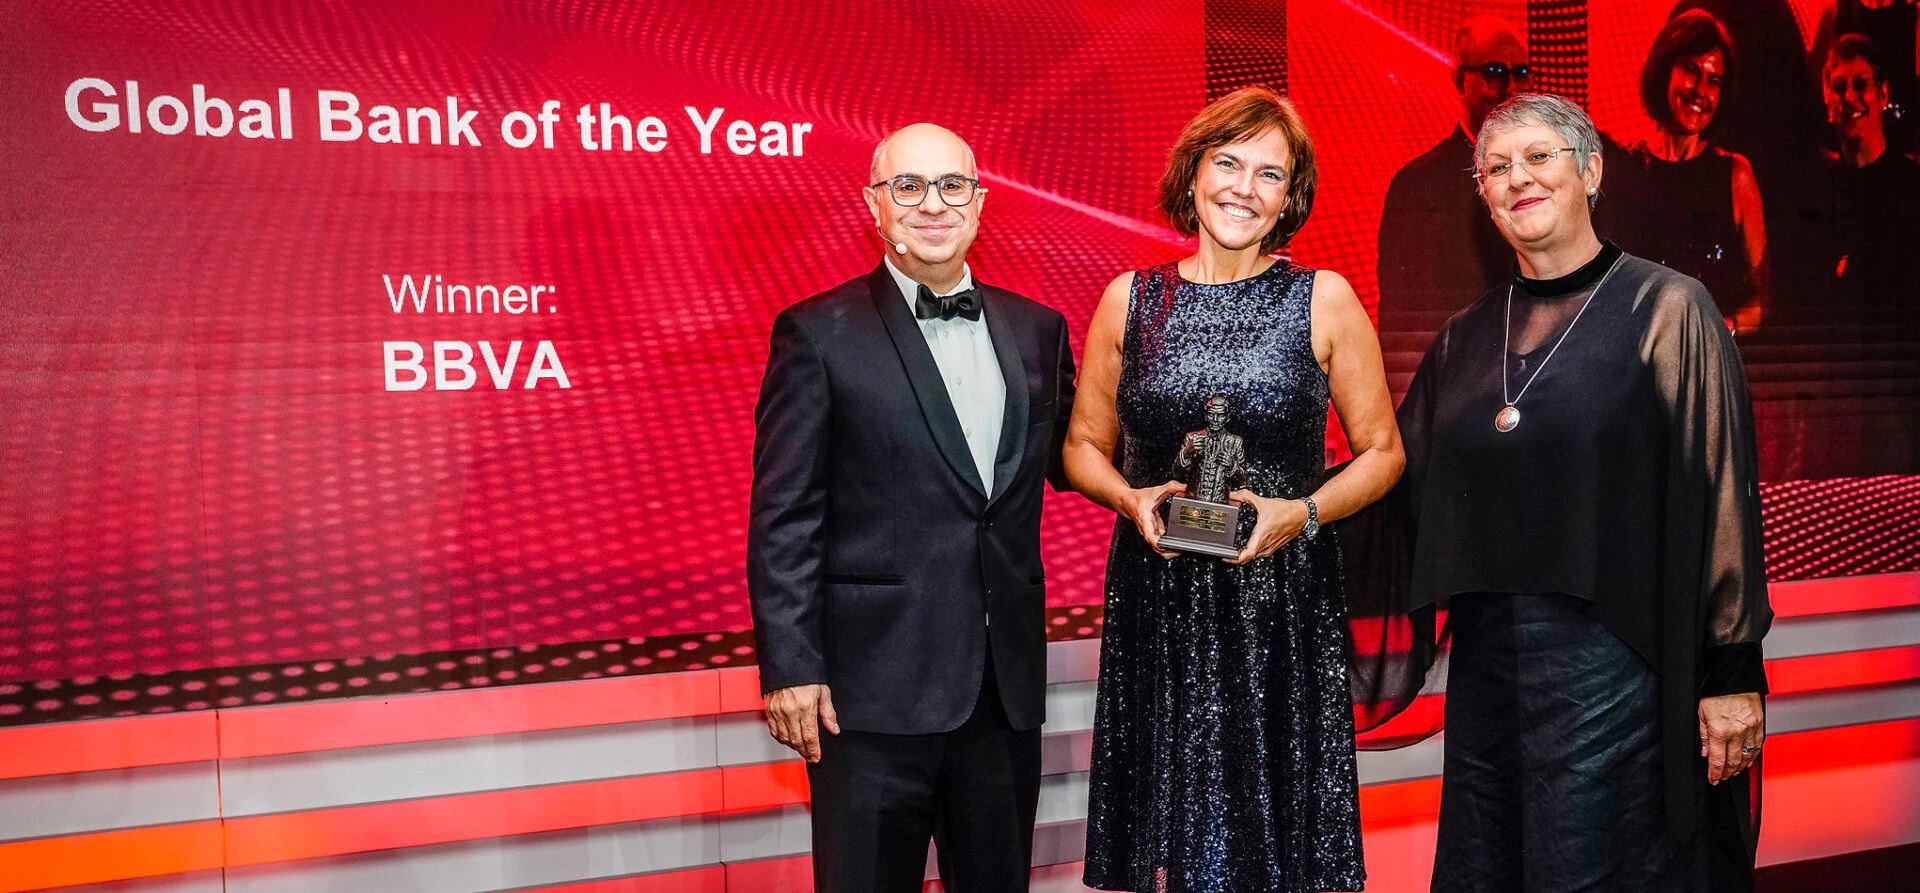 BBVA, Best Global Bank of the Year, according to The Banker